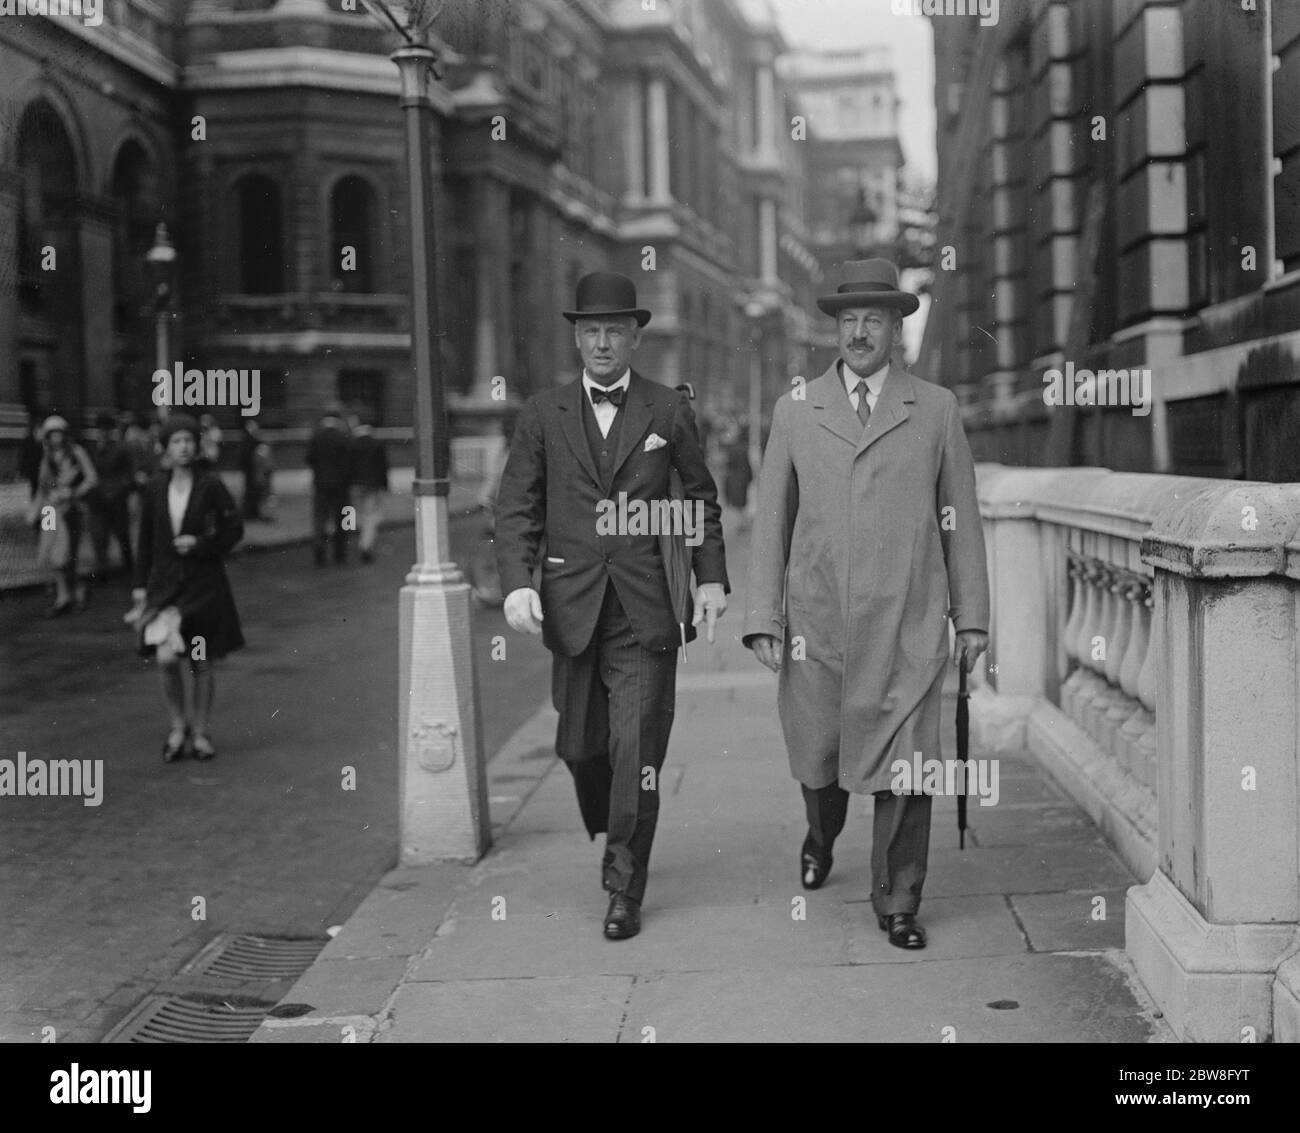 The ' opposition ' at Downing street . Sir Herbert Samuel and Sir Donald MacLean , the Liberal leaders leaving 10 Downing street . 20 August 1931 Stock Photo